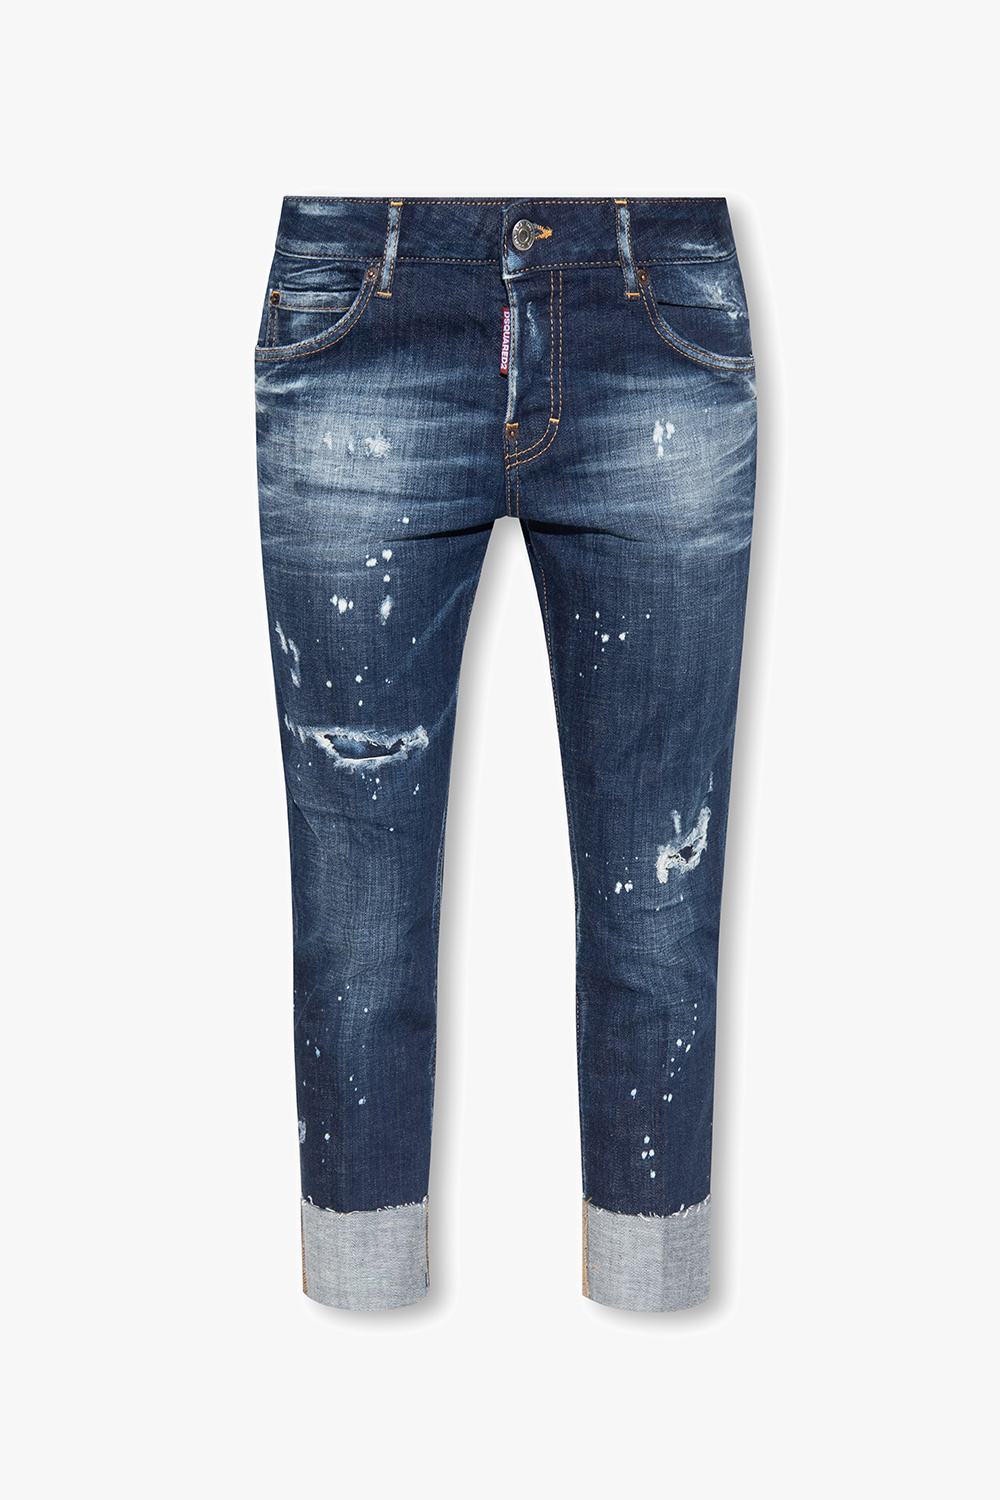 Navy blue 'Cool Girl' jeans Dsquared2 - Vitkac GB